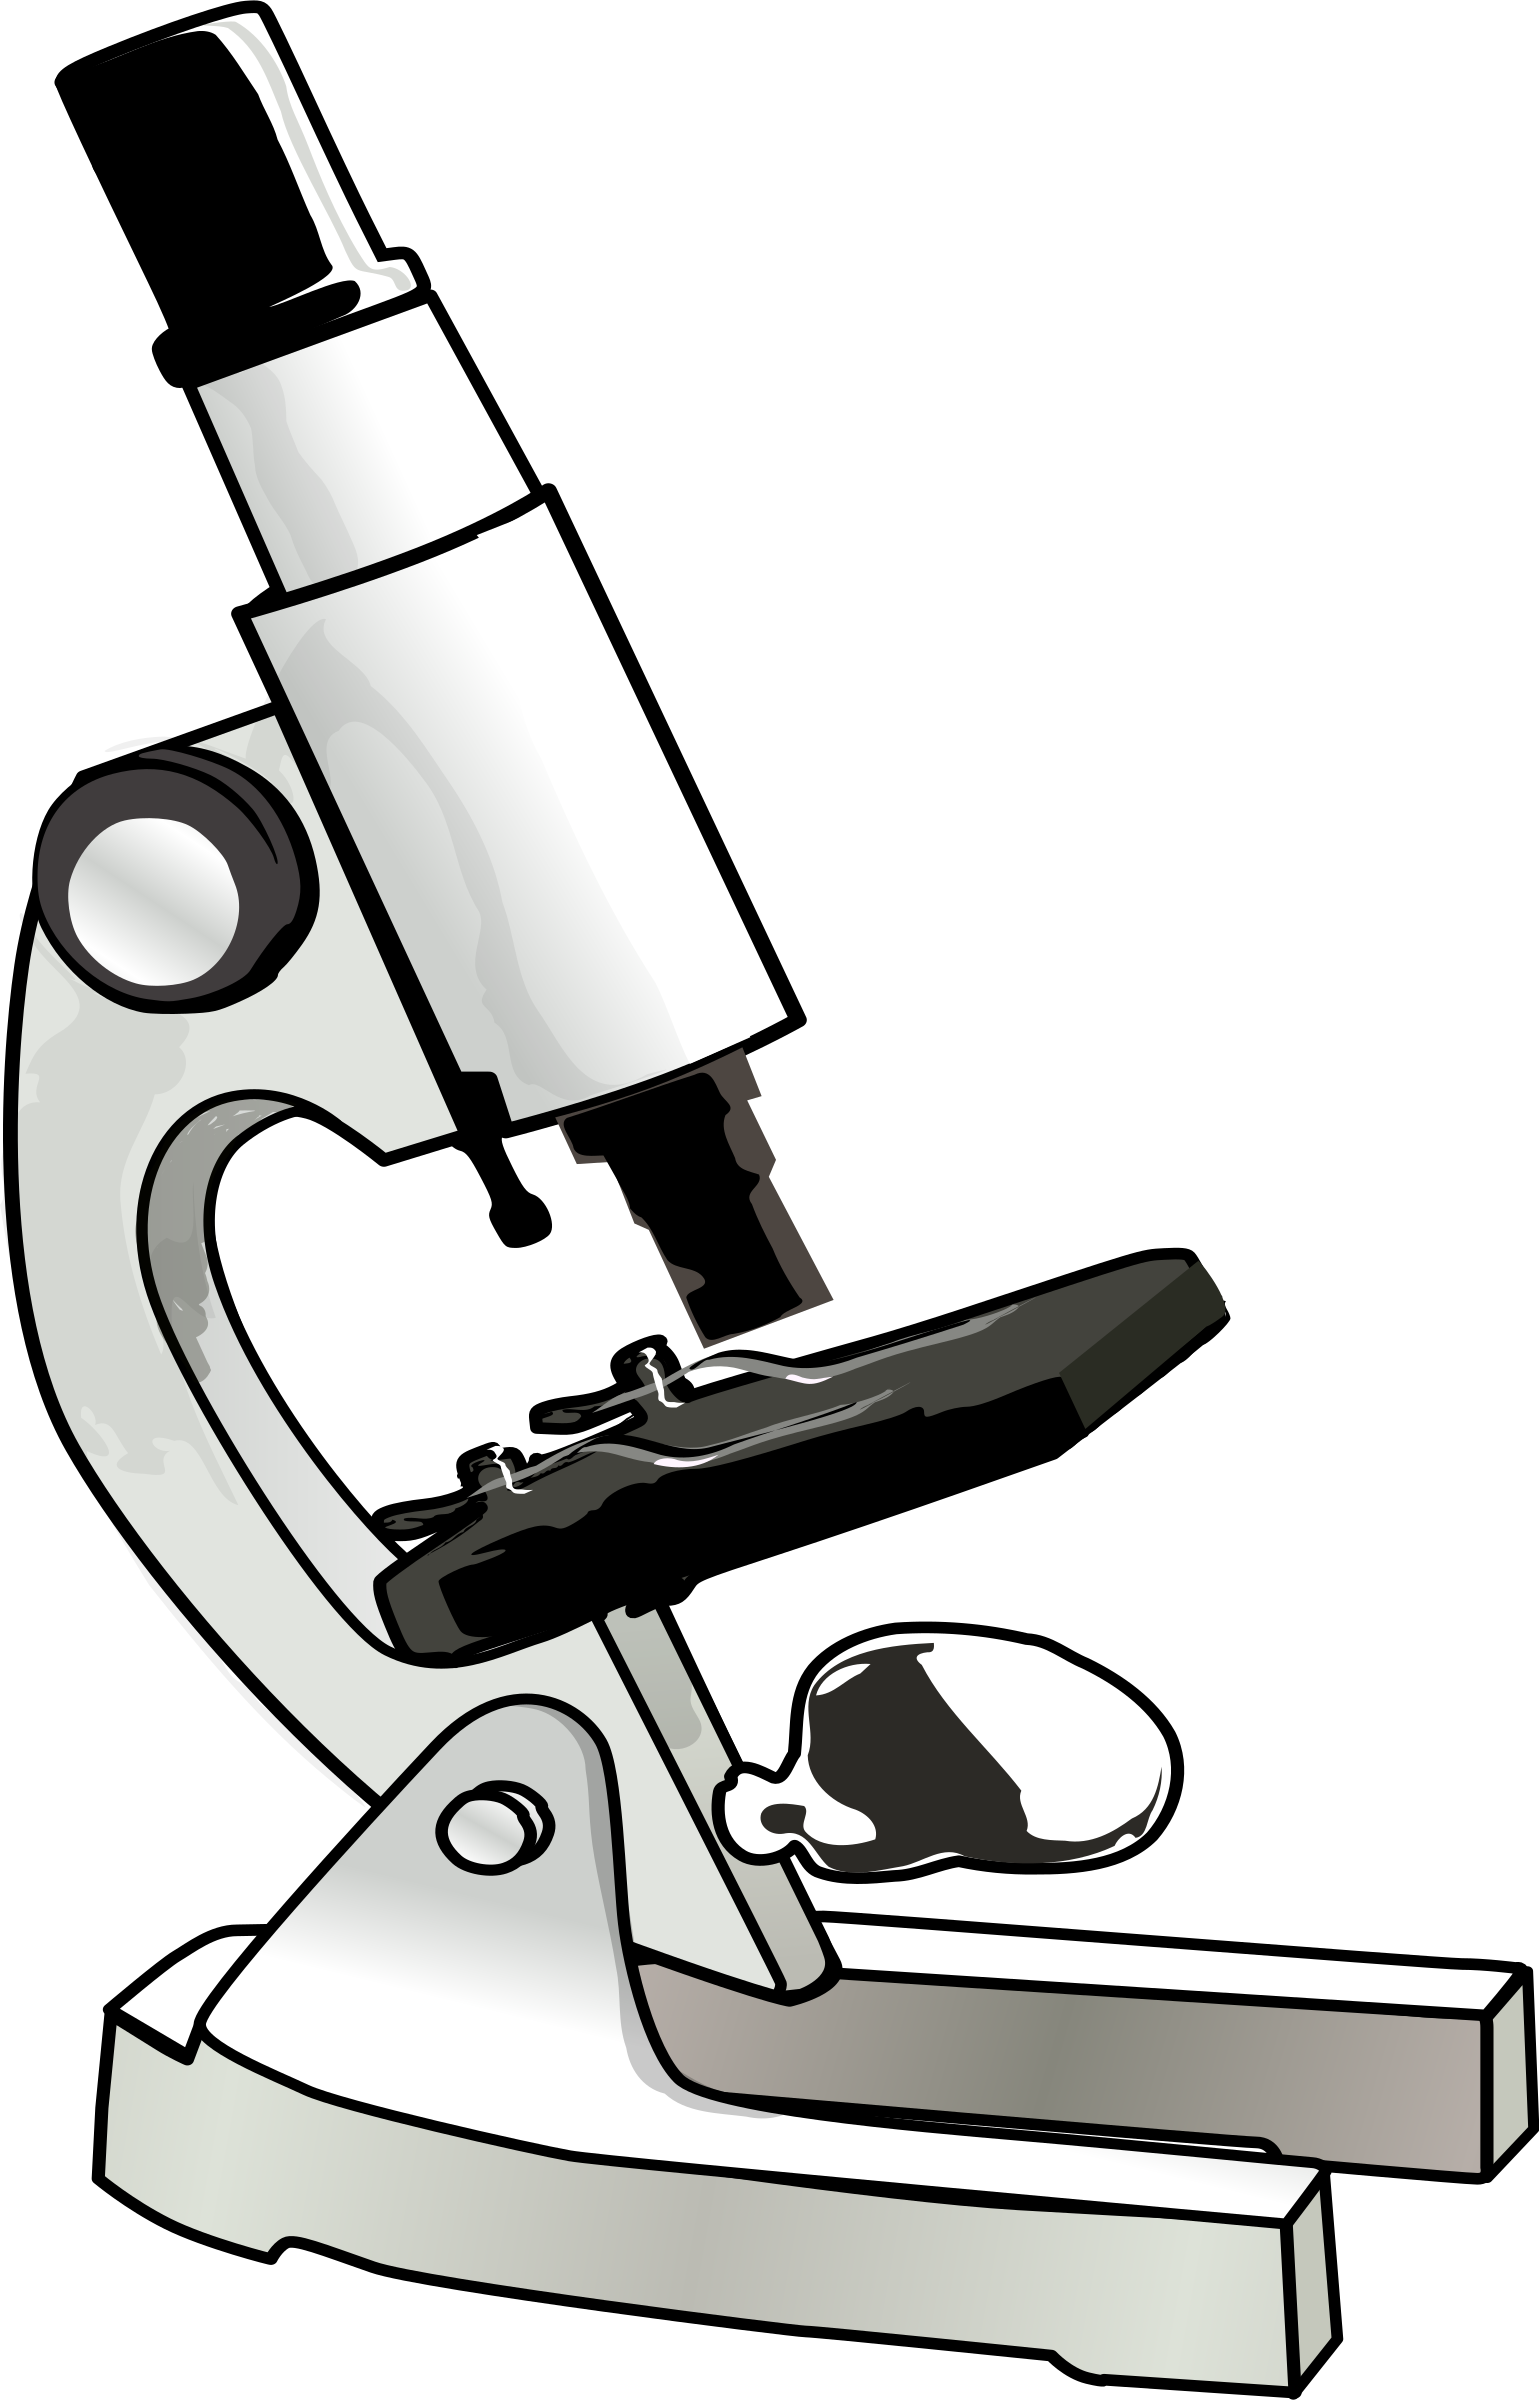 Microscope. Lab clipart biology